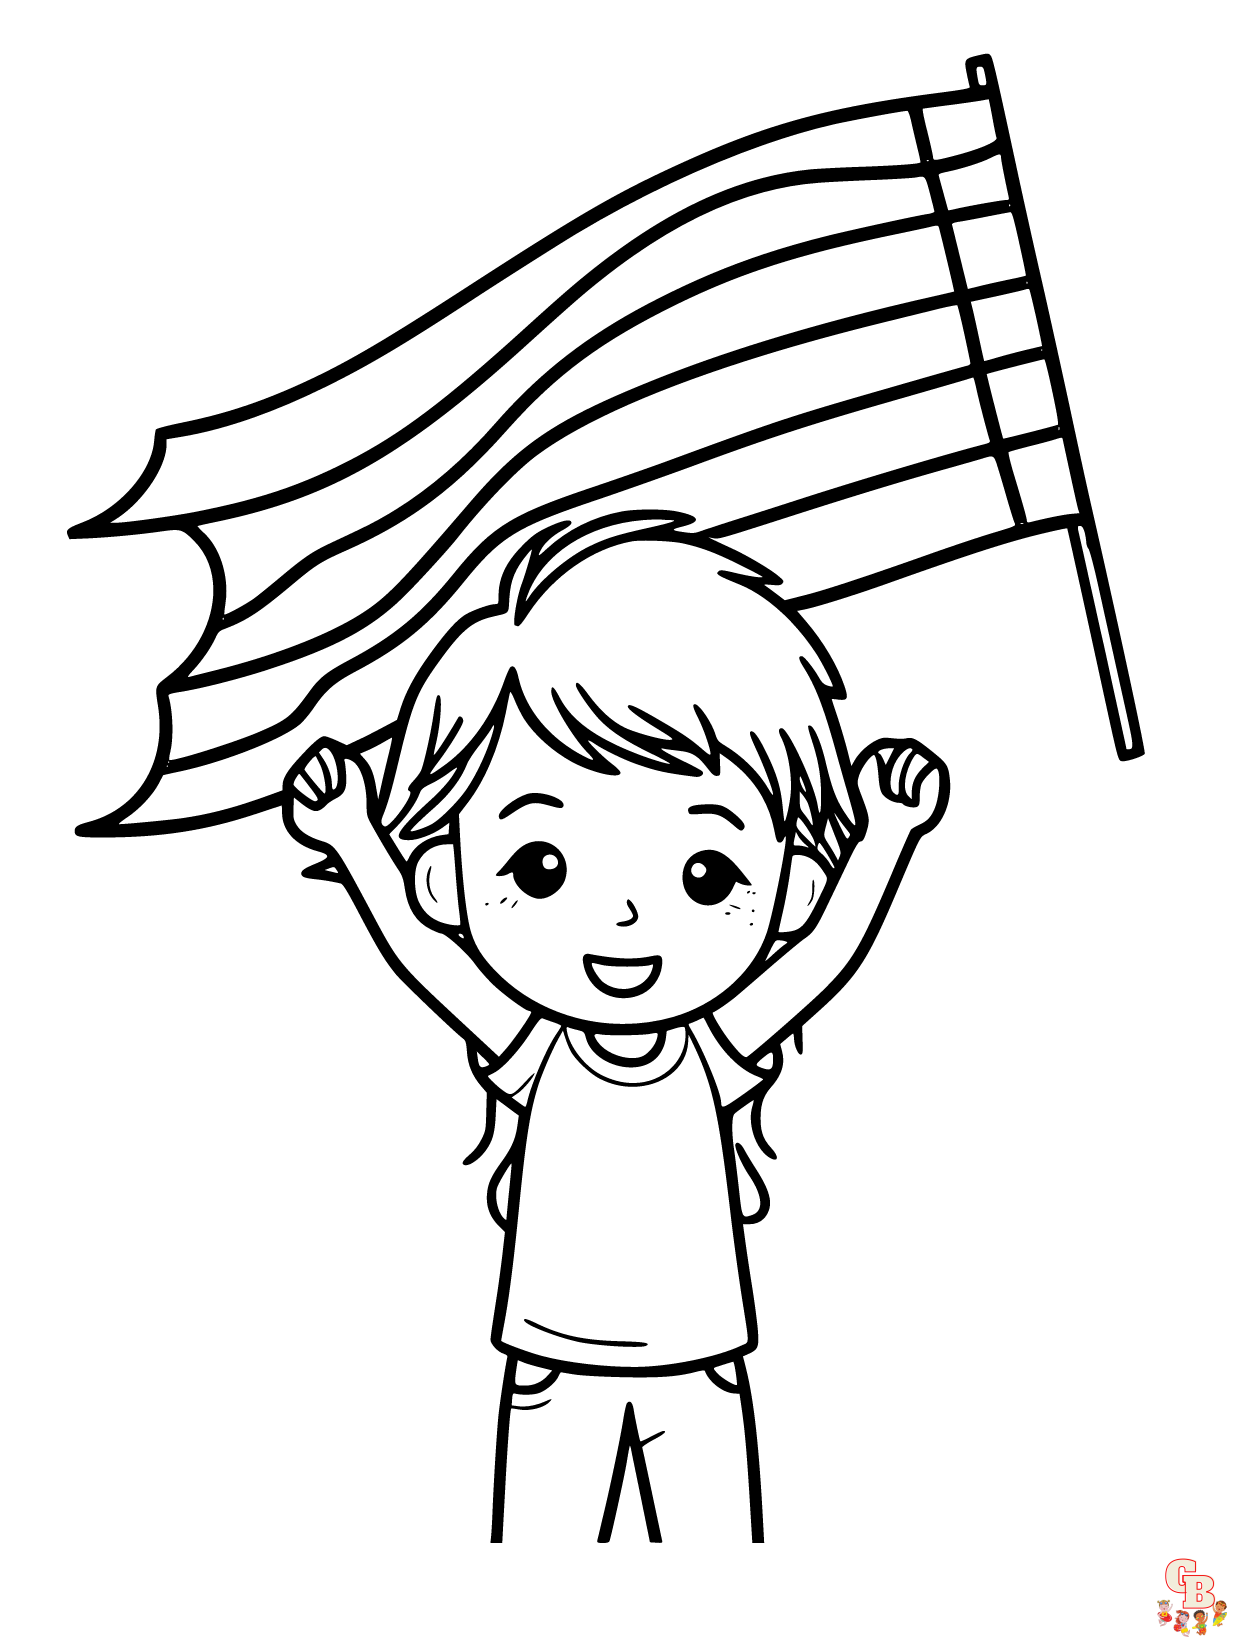 Pride Month coloring pages